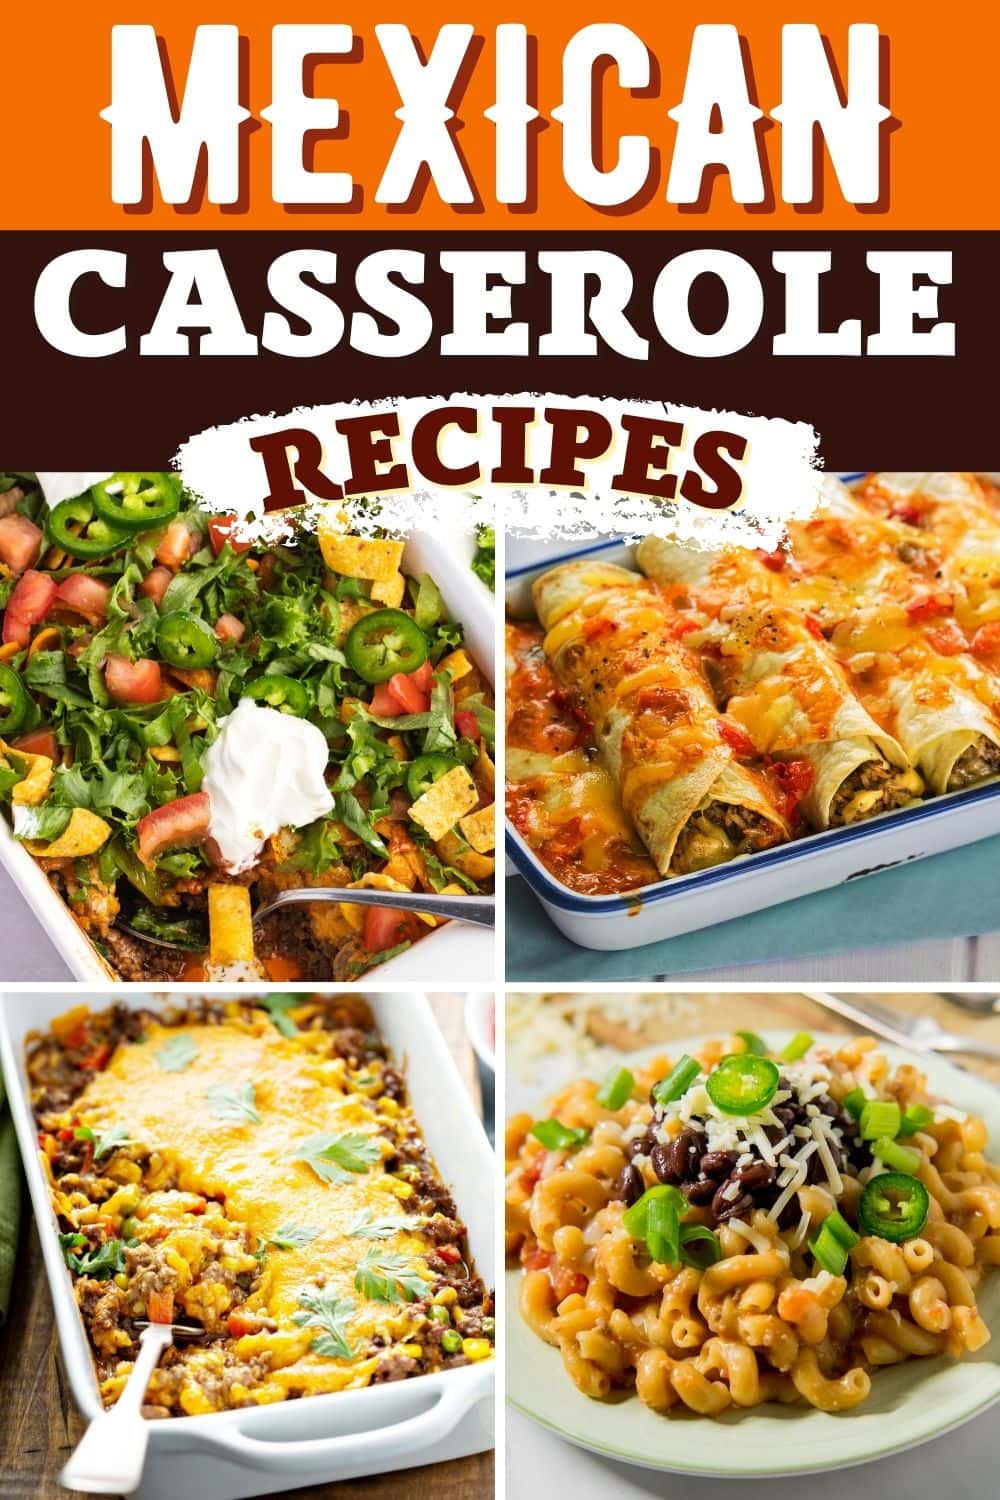 27 Easy Mexican Casserole Recipes - Insanely Good